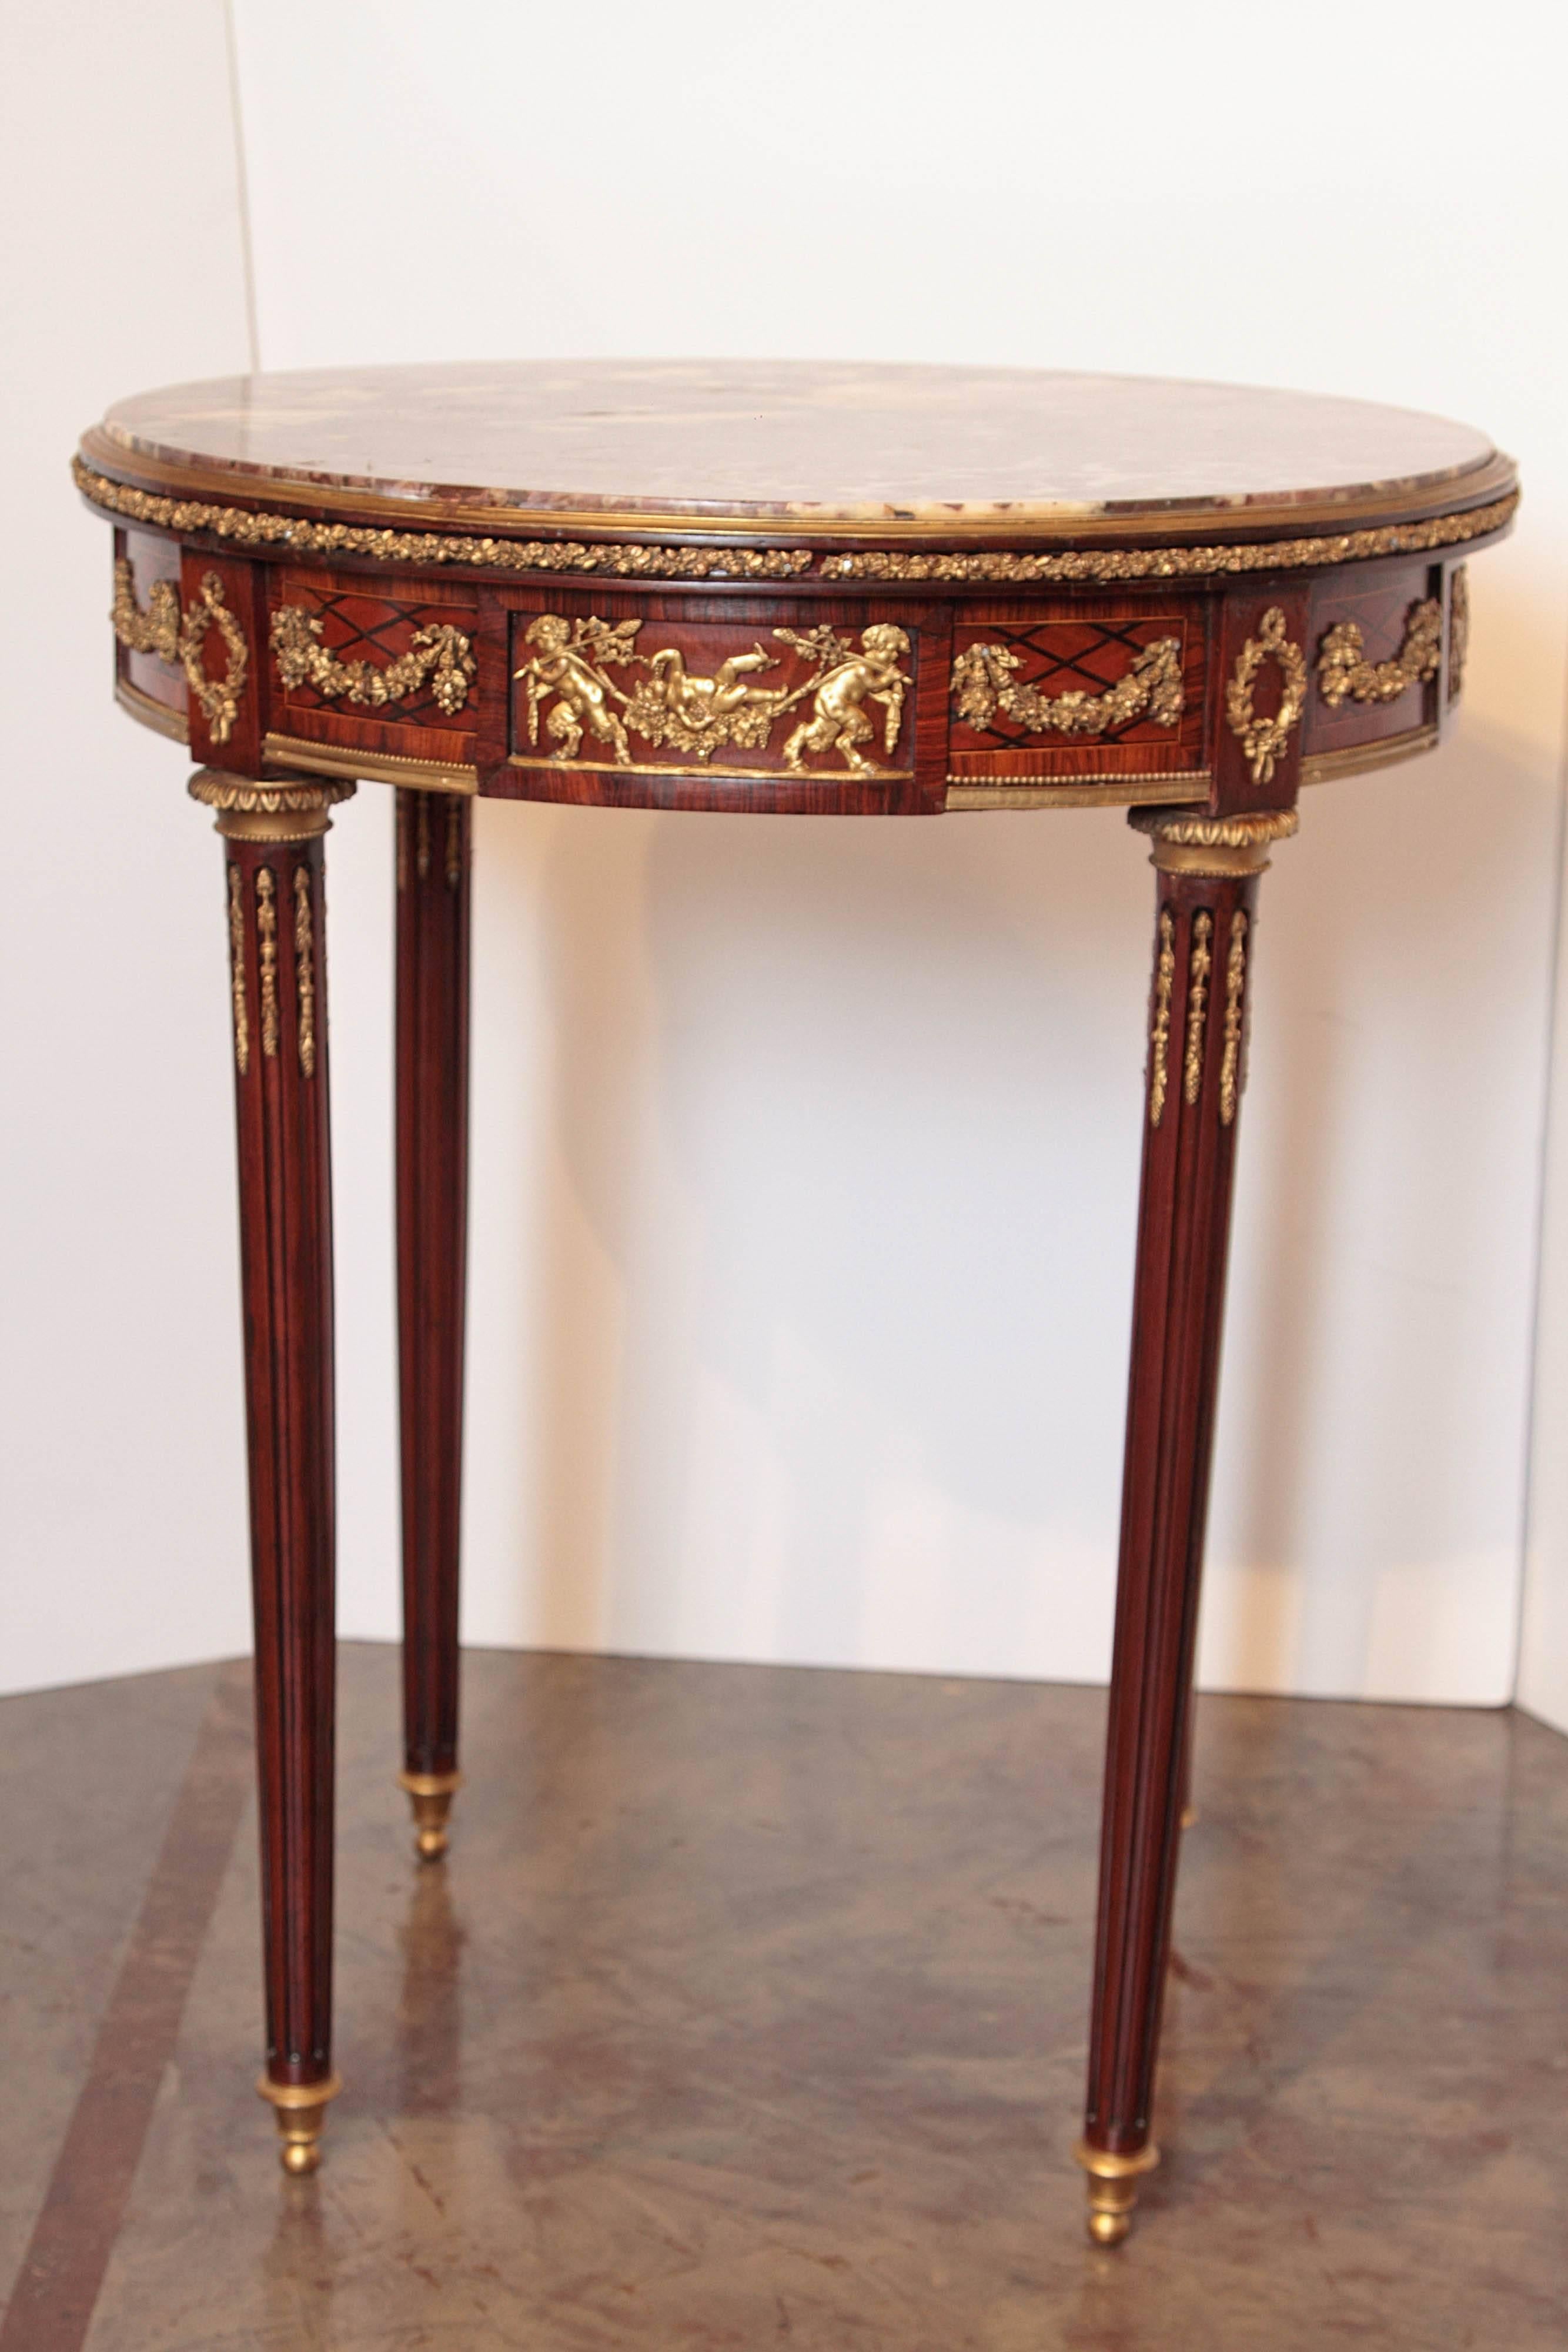 19th Century French Mahogany and Gilt Bronze Marble Top Gueridon Table In Excellent Condition For Sale In Dallas, TX